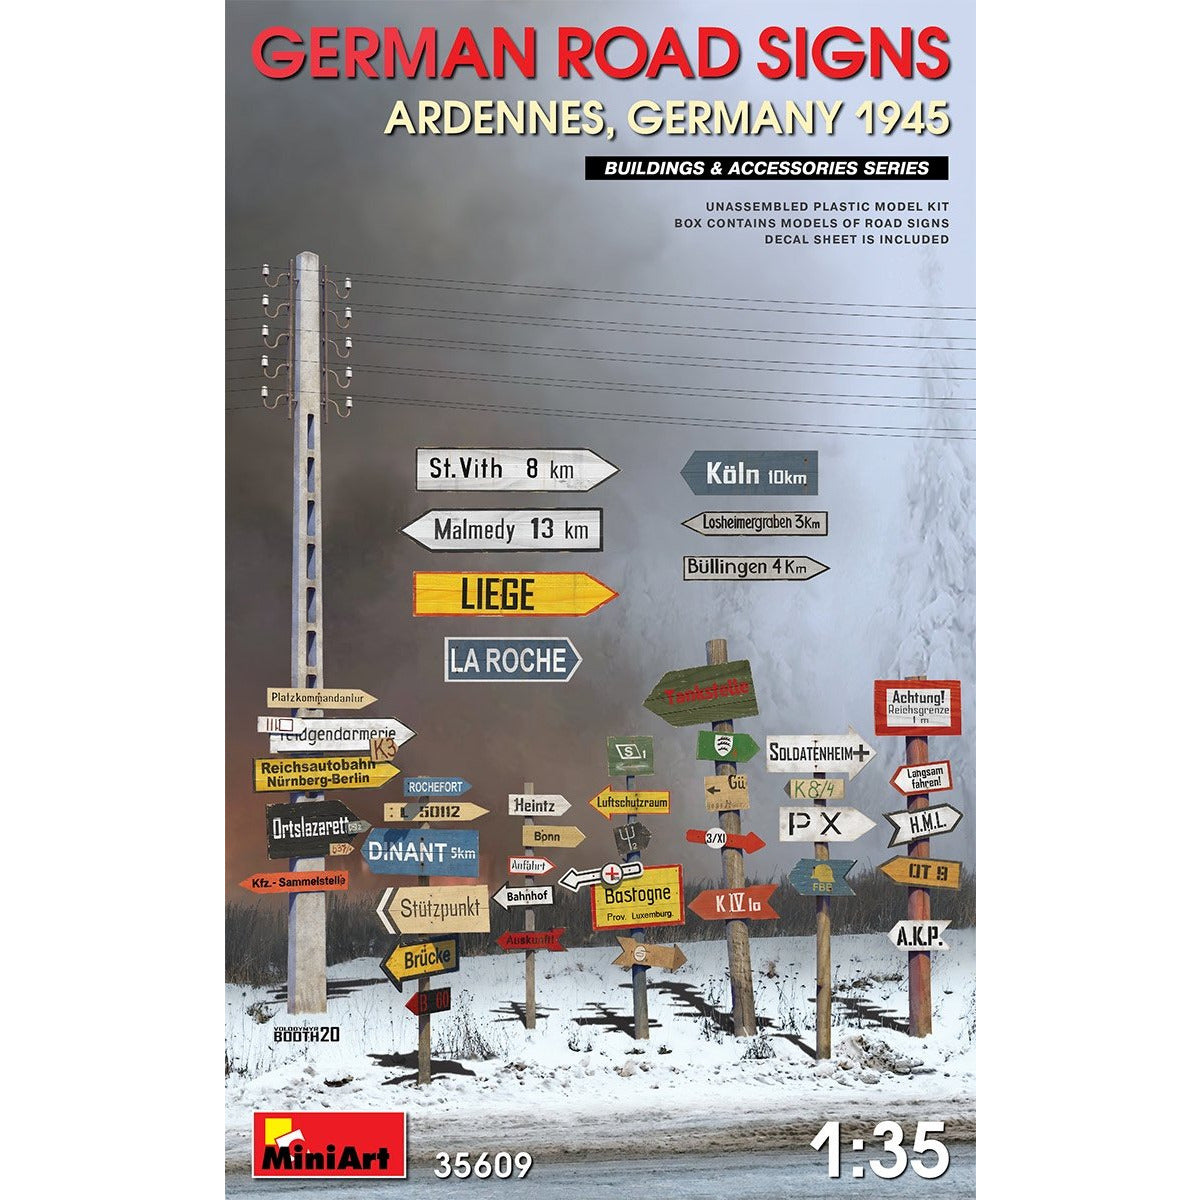 German Road Signs Ardennes, Germany 1945 #35609 1/35 Detail Kit by MiniArt